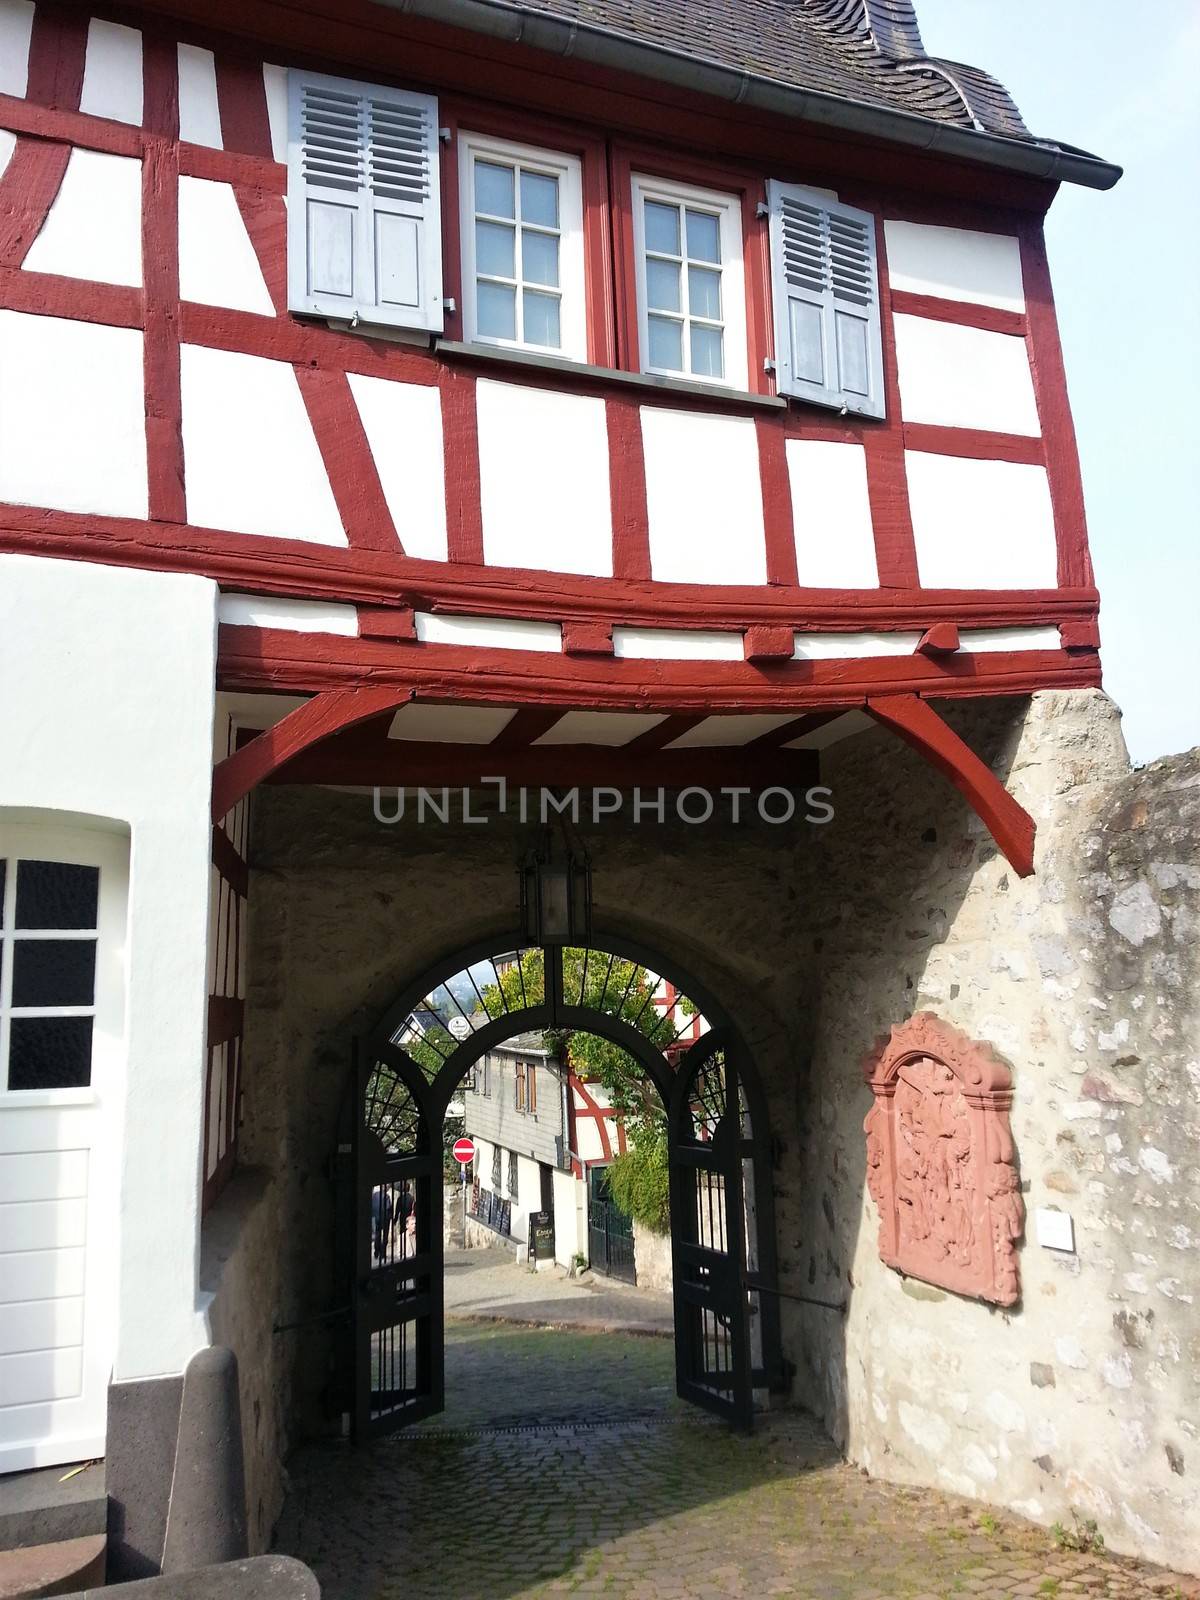 Half timbered house in Limburg with road and gate by pisces2386